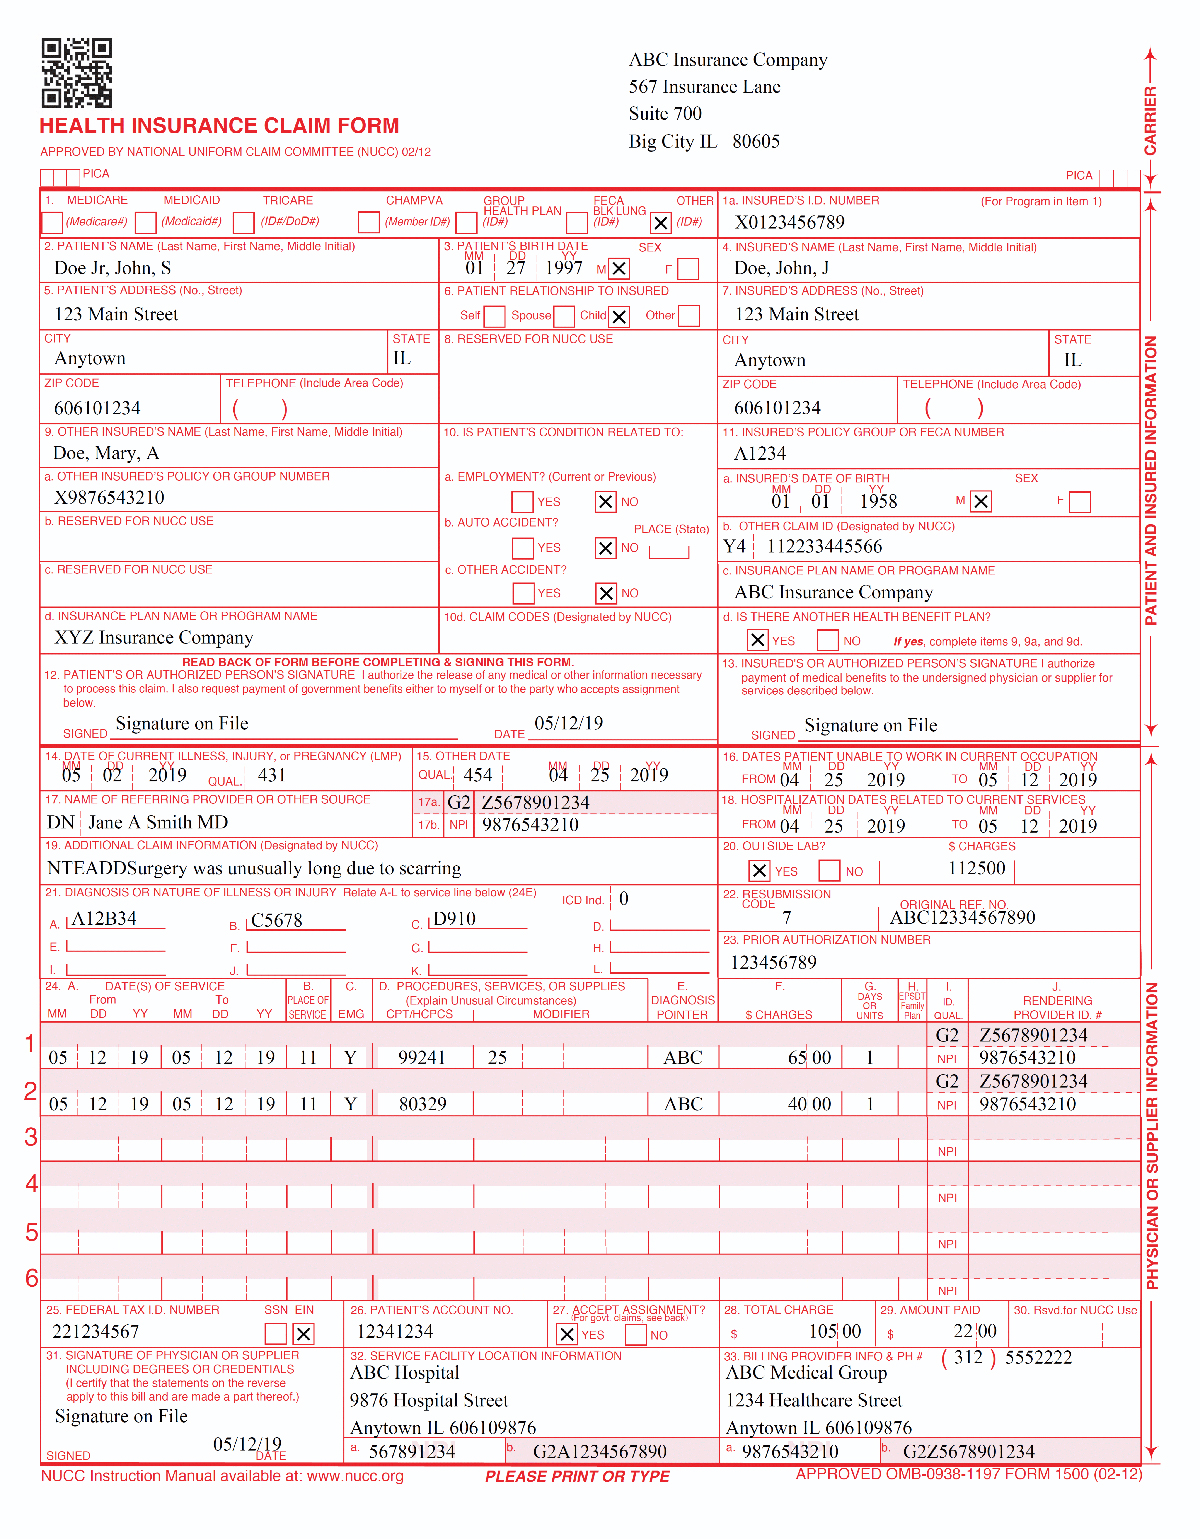 cms-1500-paper-claim-small-png-fiachra-forms-charting-solutions